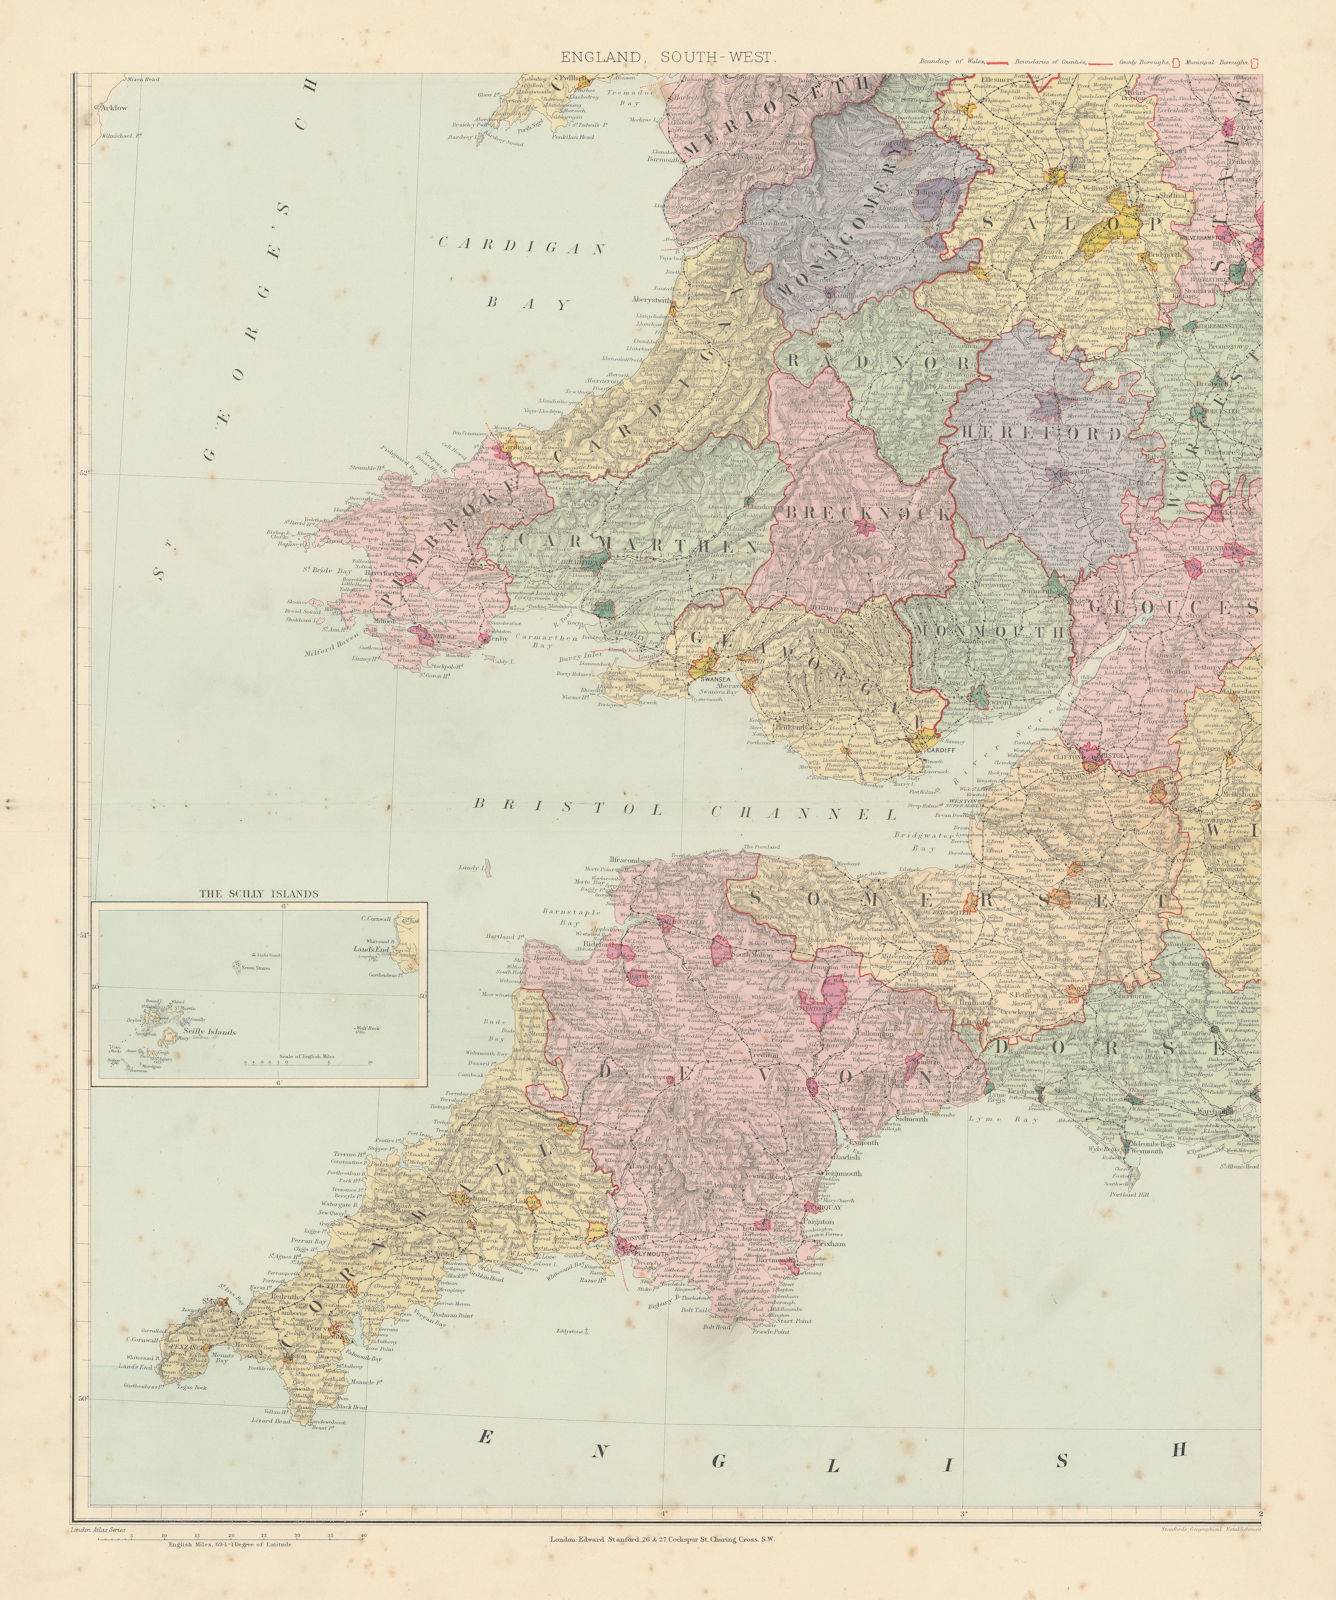 Associate Product South-west England & South Wales. Large 62x51cm. STANFORD 1894 old antique map